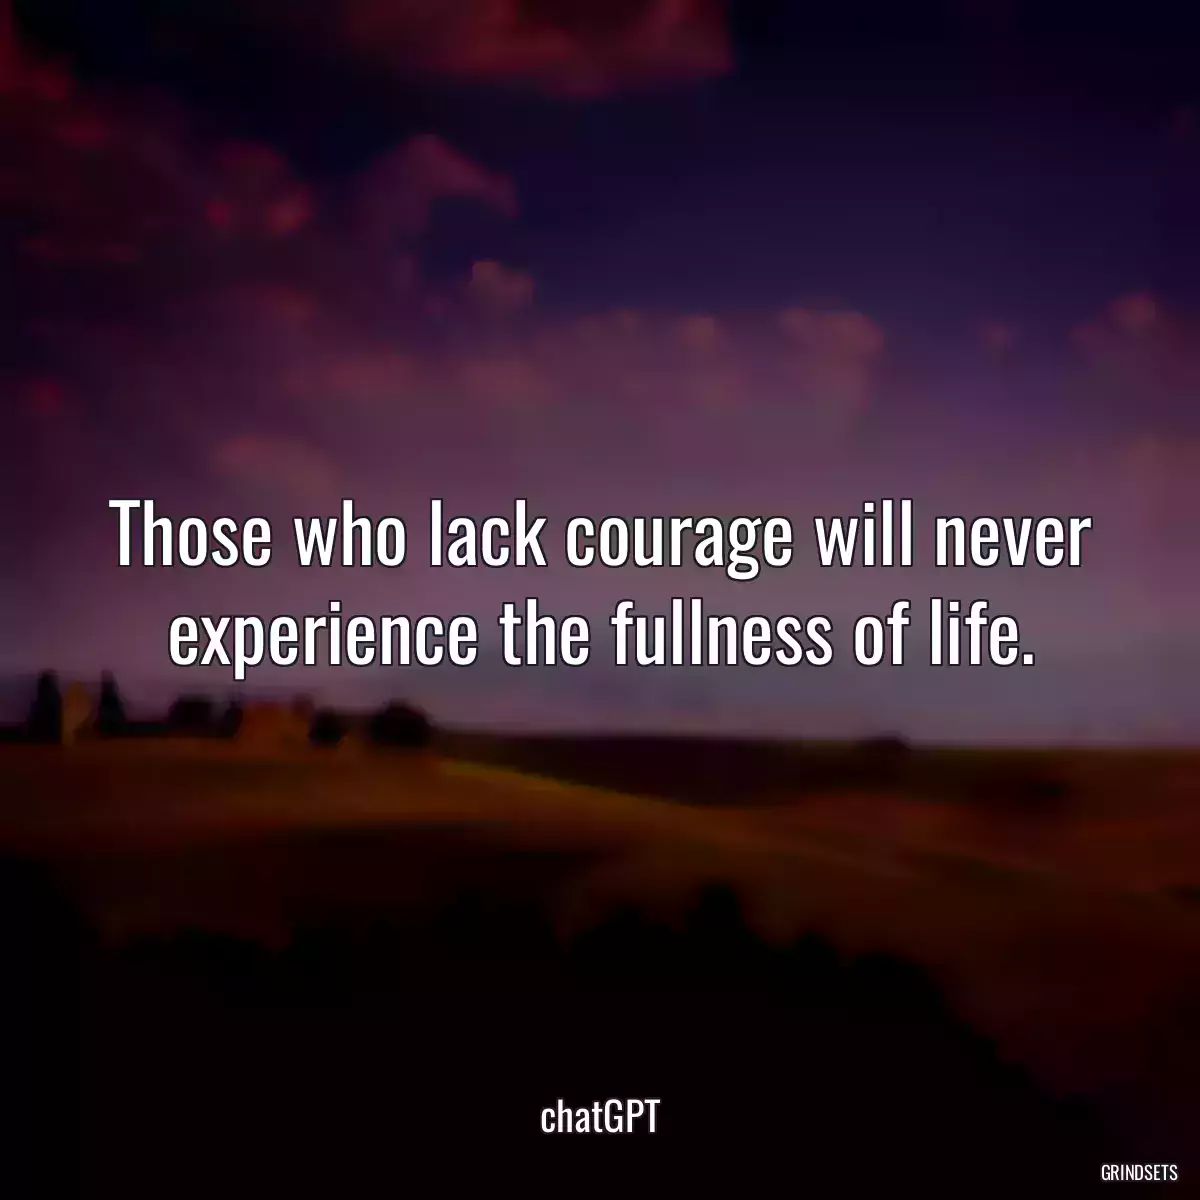 Those who lack courage will never experience the fullness of life.